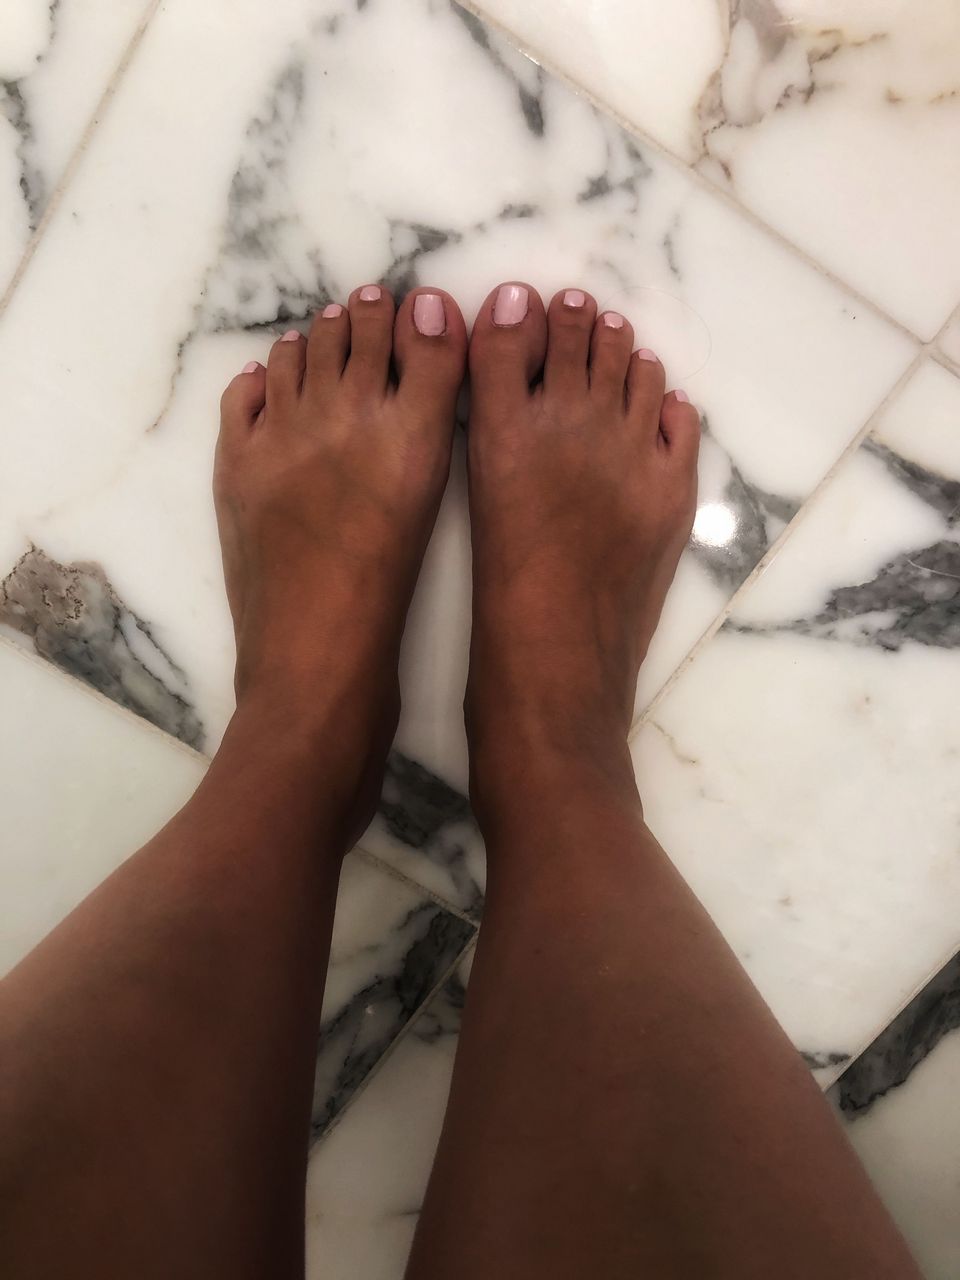 Kaylani Vacation Toes Lets Get Rid Of This Tan Line